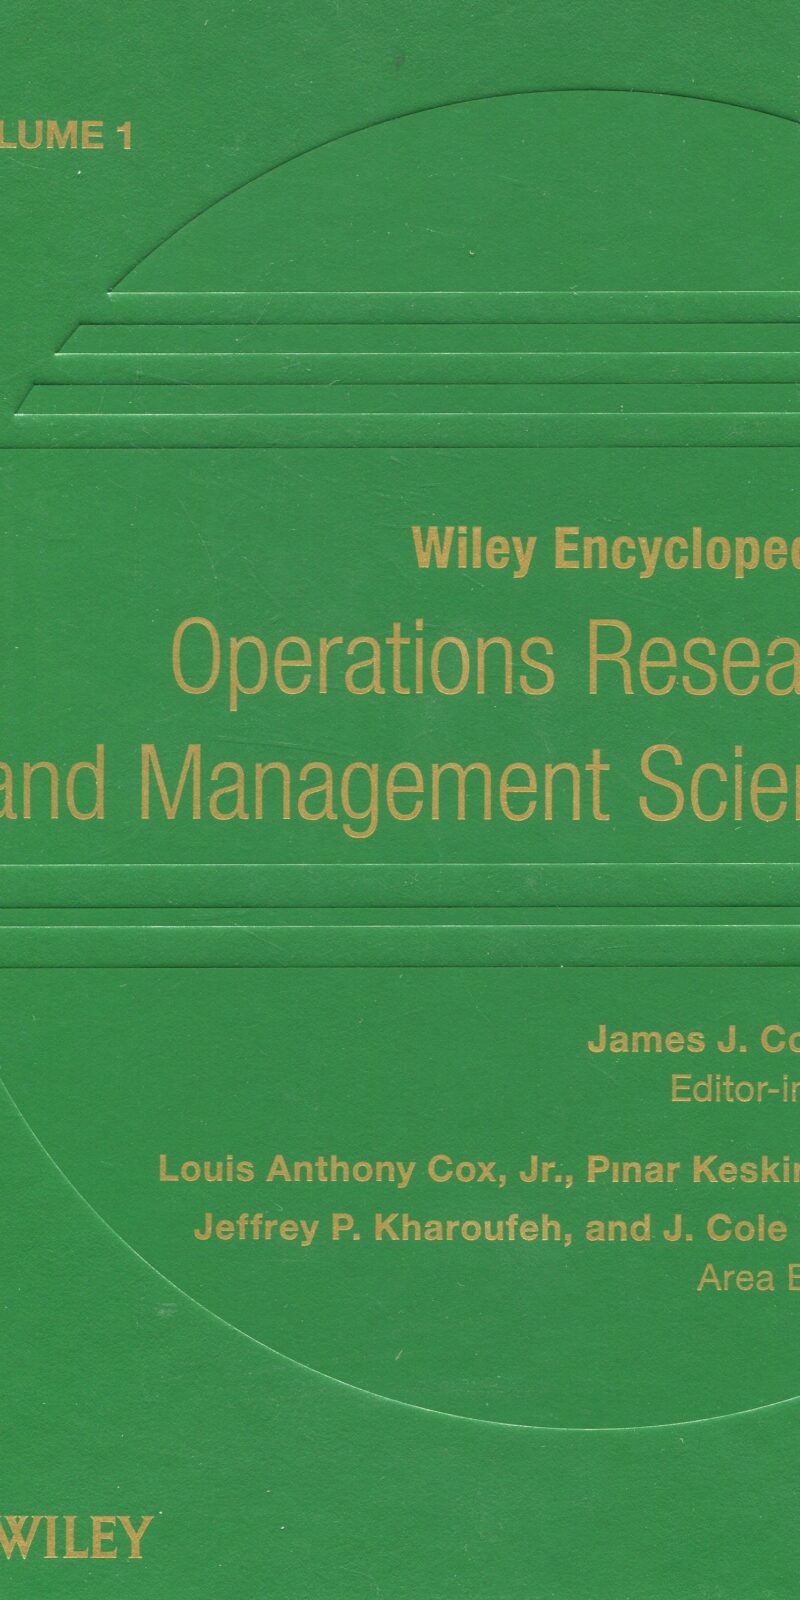 Wiley Encyclopedia of Operations Research and Management 9780470400548